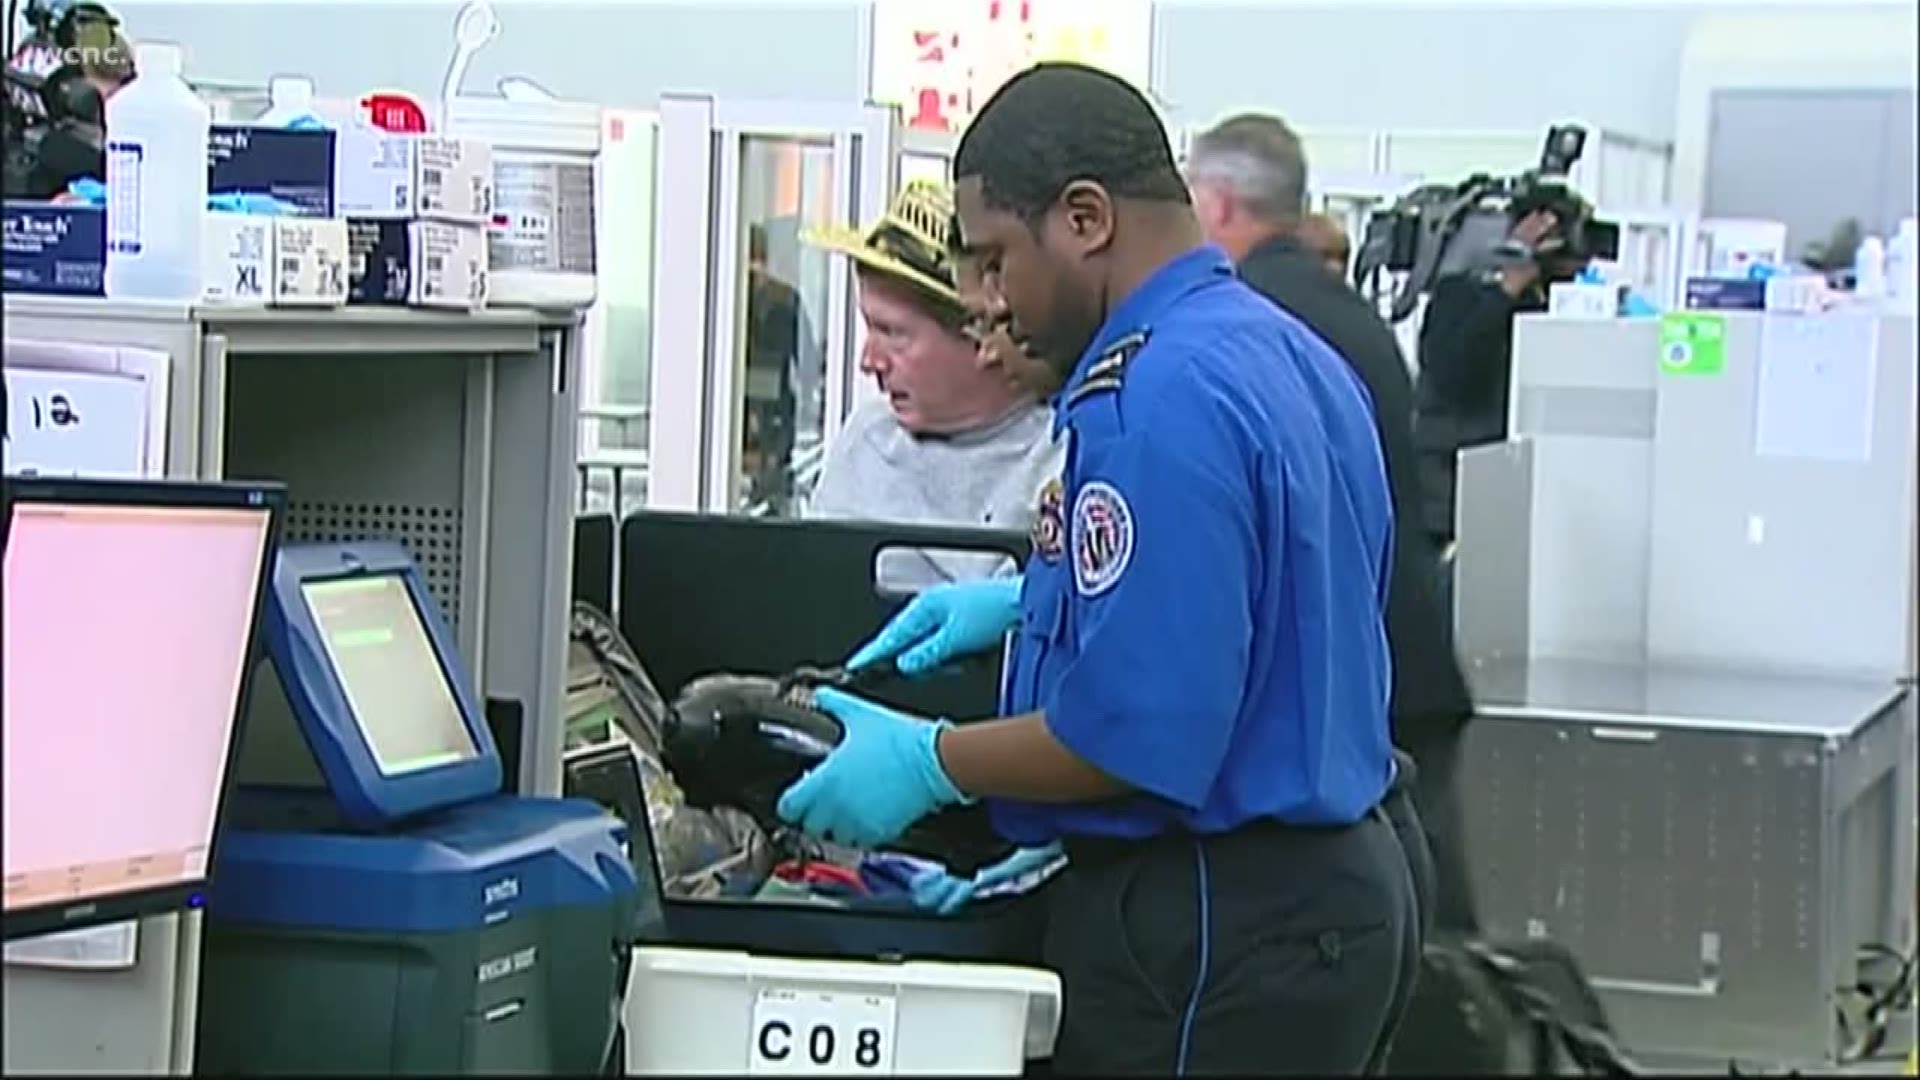 Pack your bags, the unofficial start to summer kicks off with Memorial Day weekend and the TSA is expecting a record number of travelers.